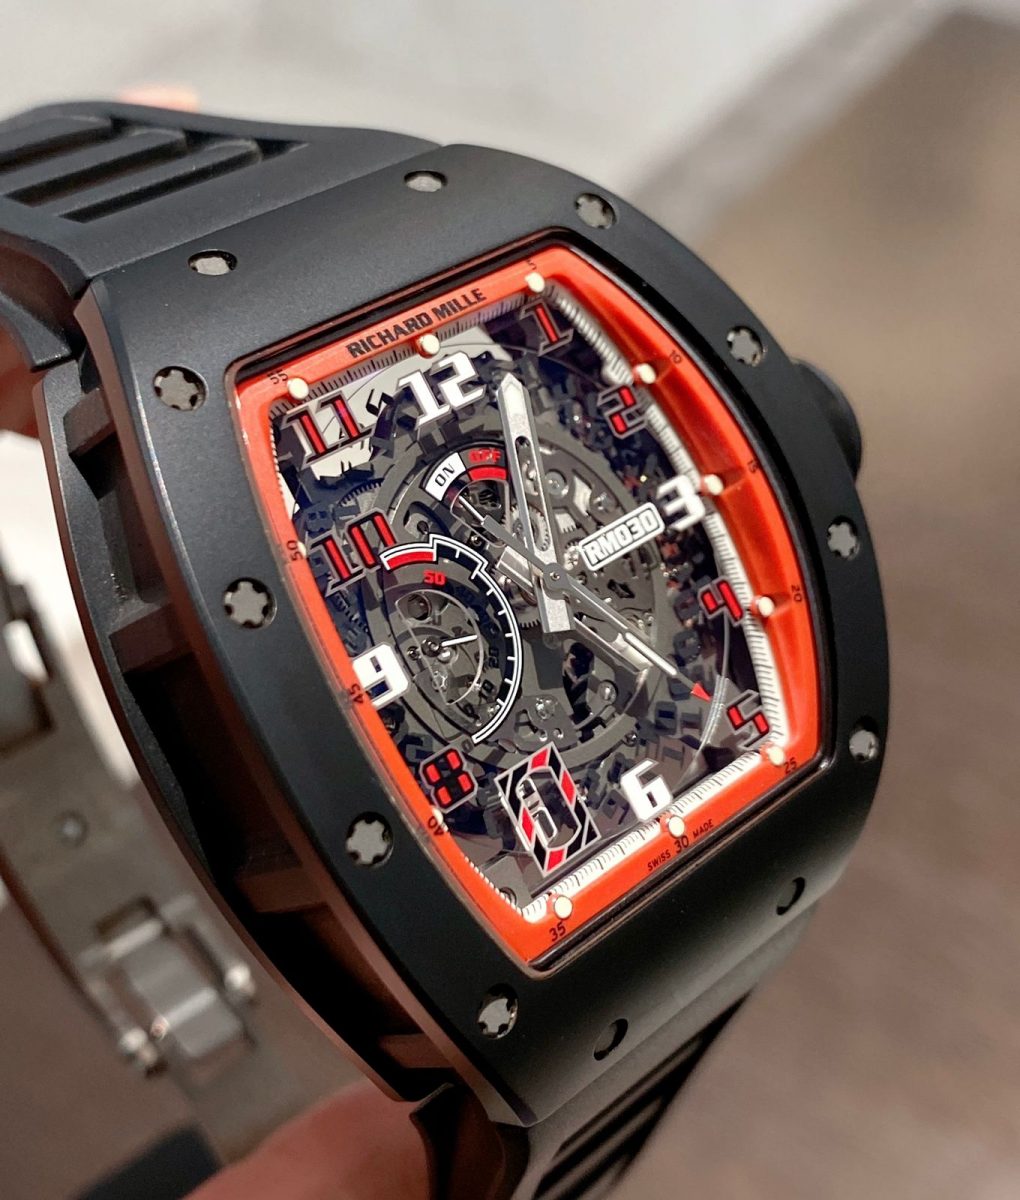 Richard Mille RM30 Automatic Black Dash Americans used 2018